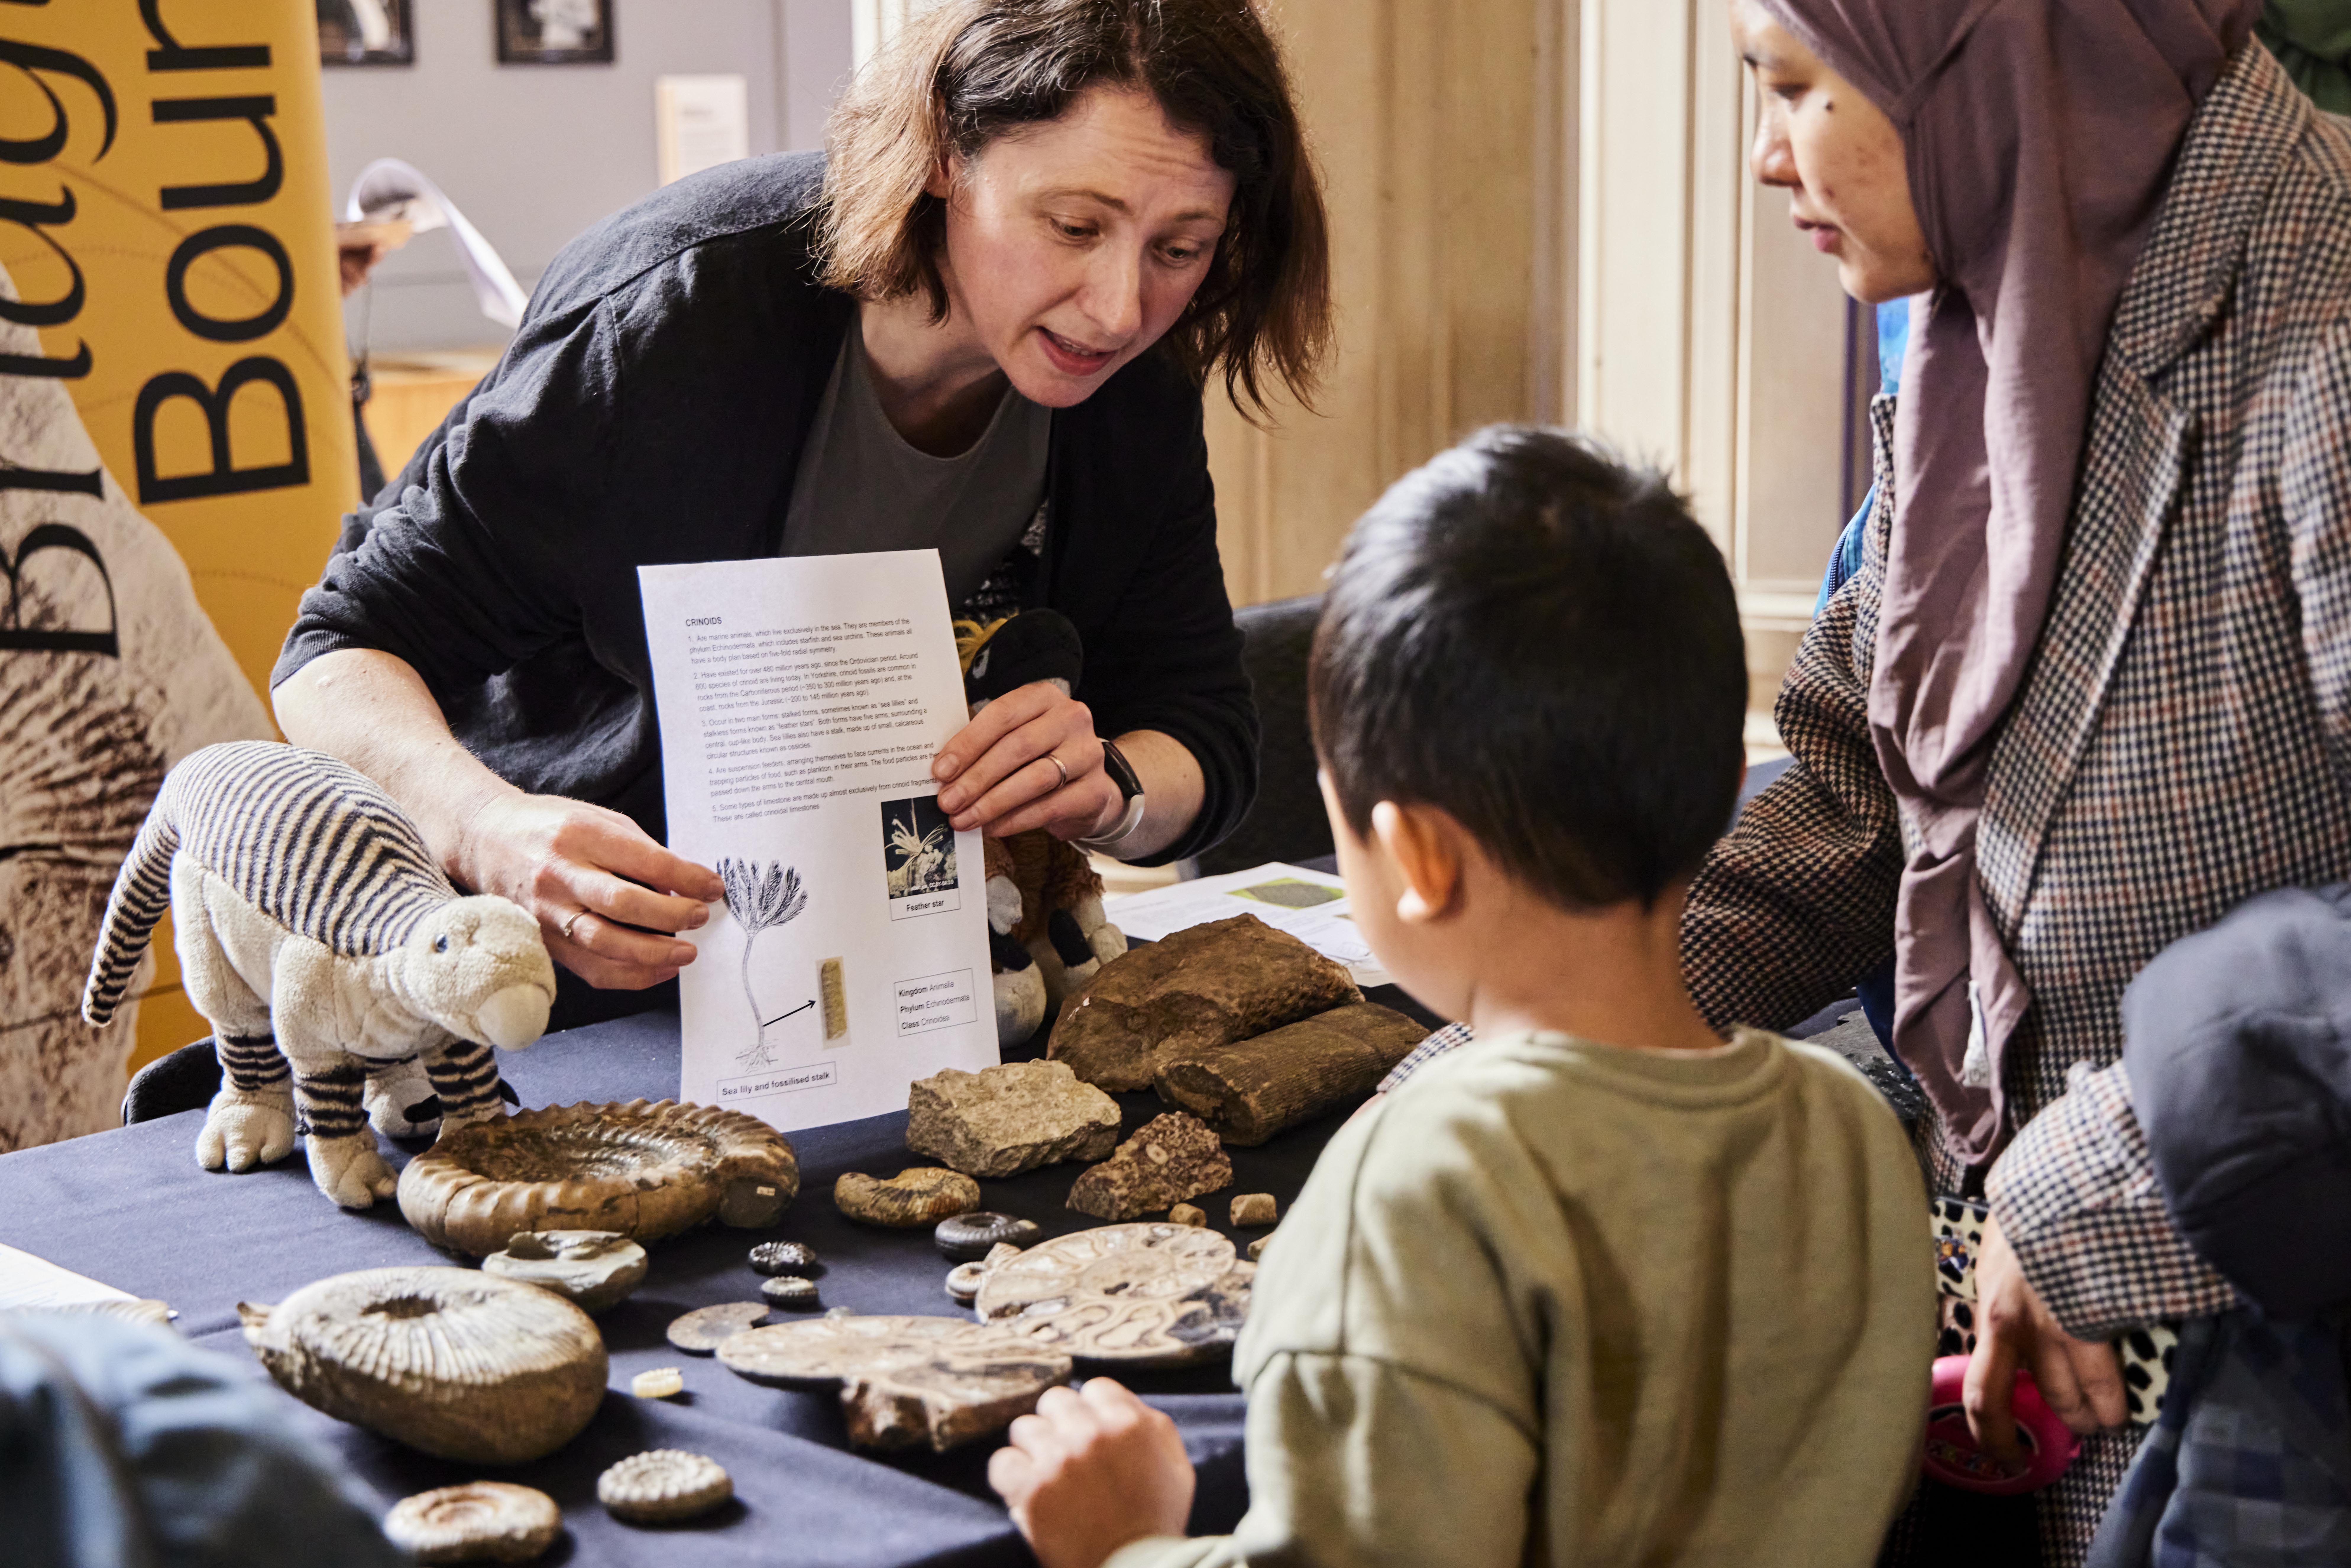 A researcher holds up a sheet of information about fossils to a child and parent. The table has fossils and a toy dinosaur on it.